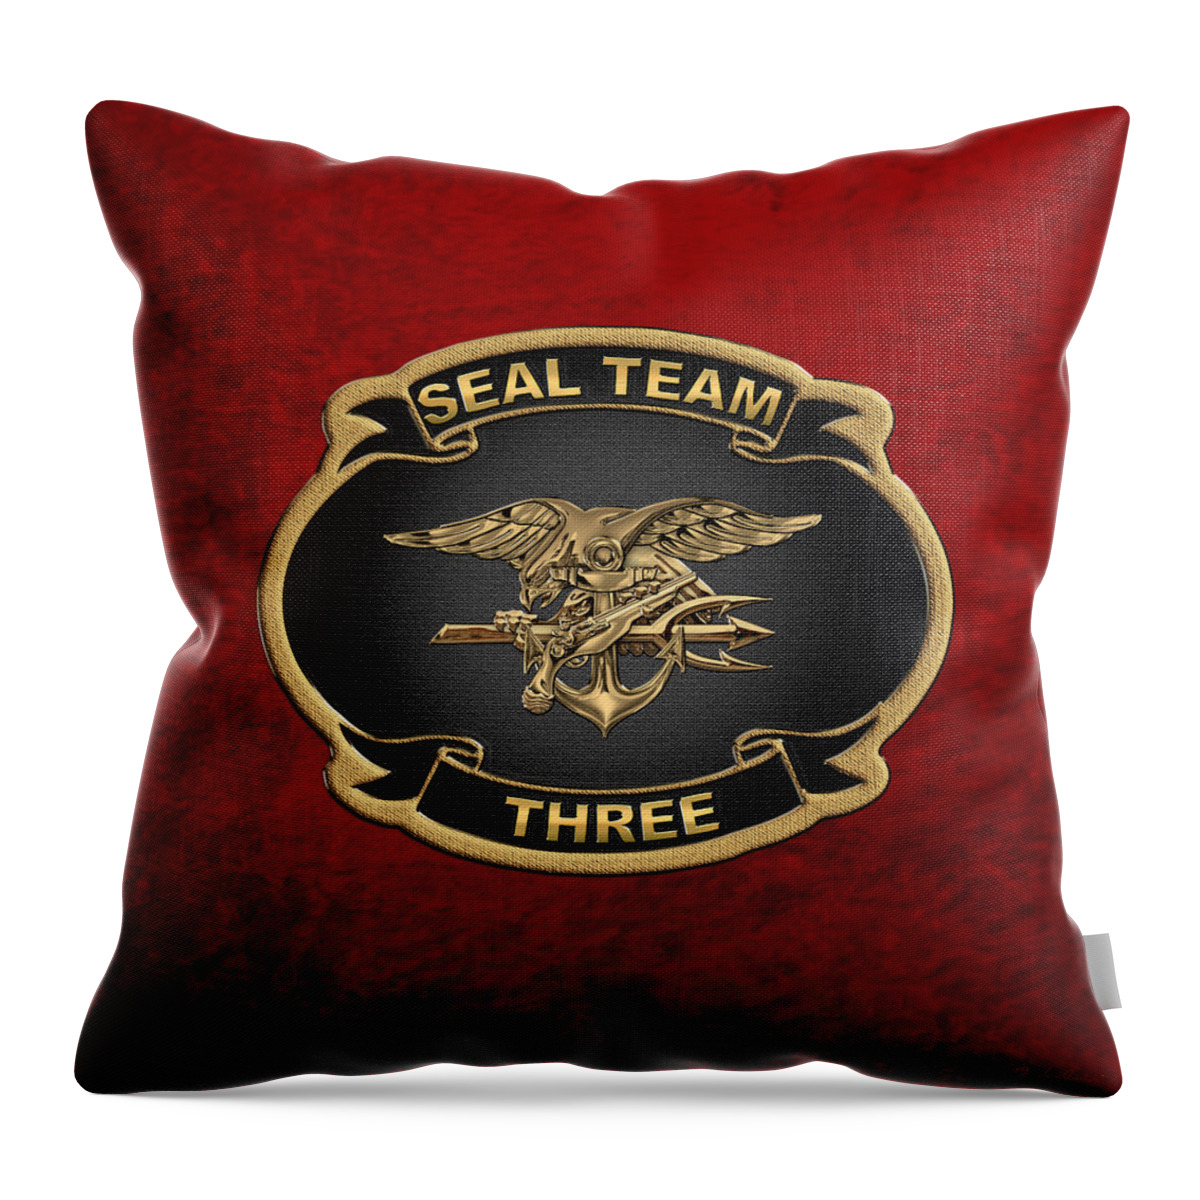 'military Insignia & Heraldry - Nswc' Collection By Serge Averbukh Throw Pillow featuring the digital art U. S. Navy S E A Ls - S E A L Team 3 - S T 3 Patch over Red Velvet by Serge Averbukh